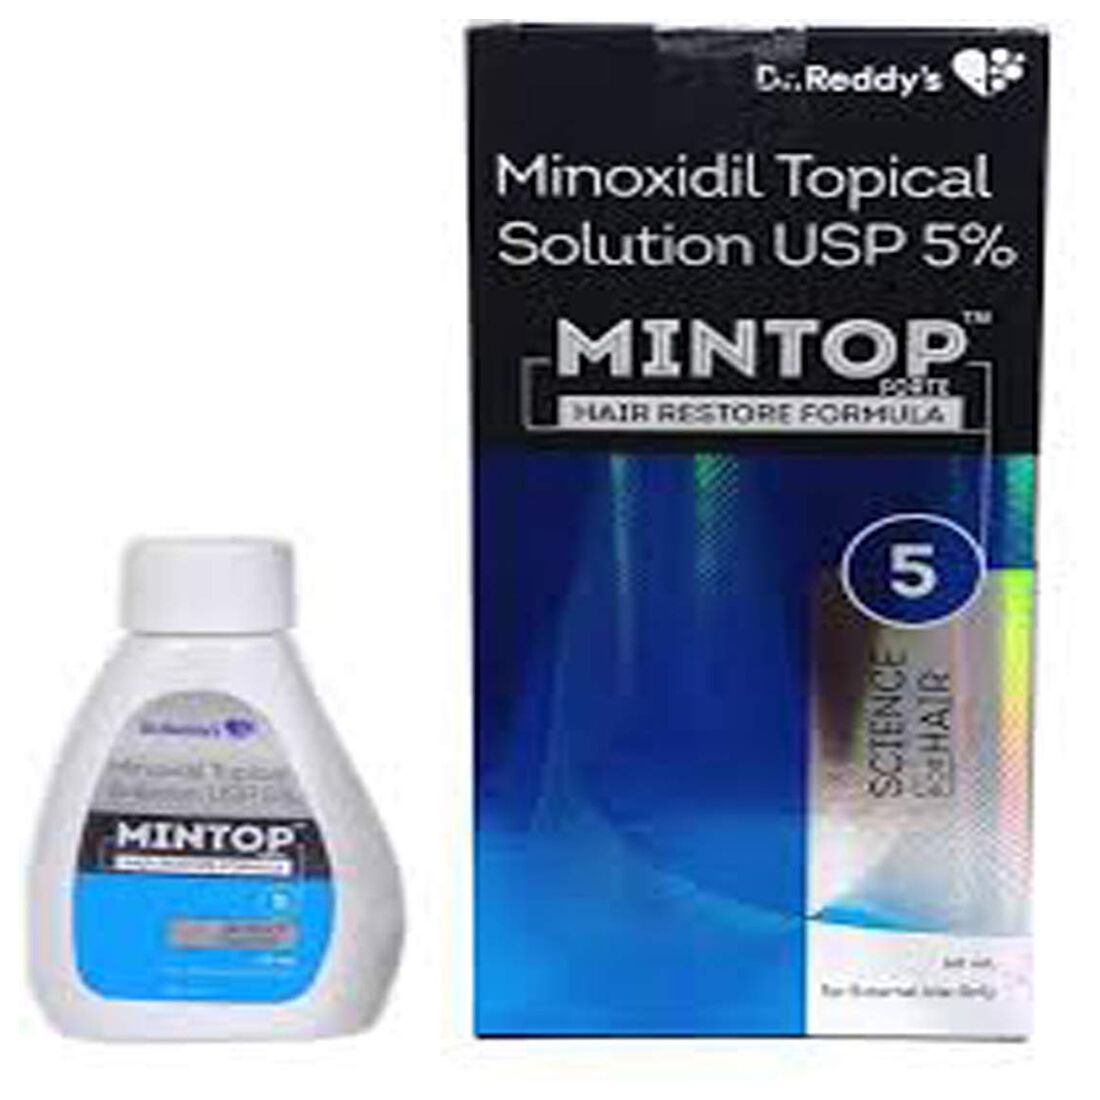 Buy 's Mintop Topical Solution Online at Best Price